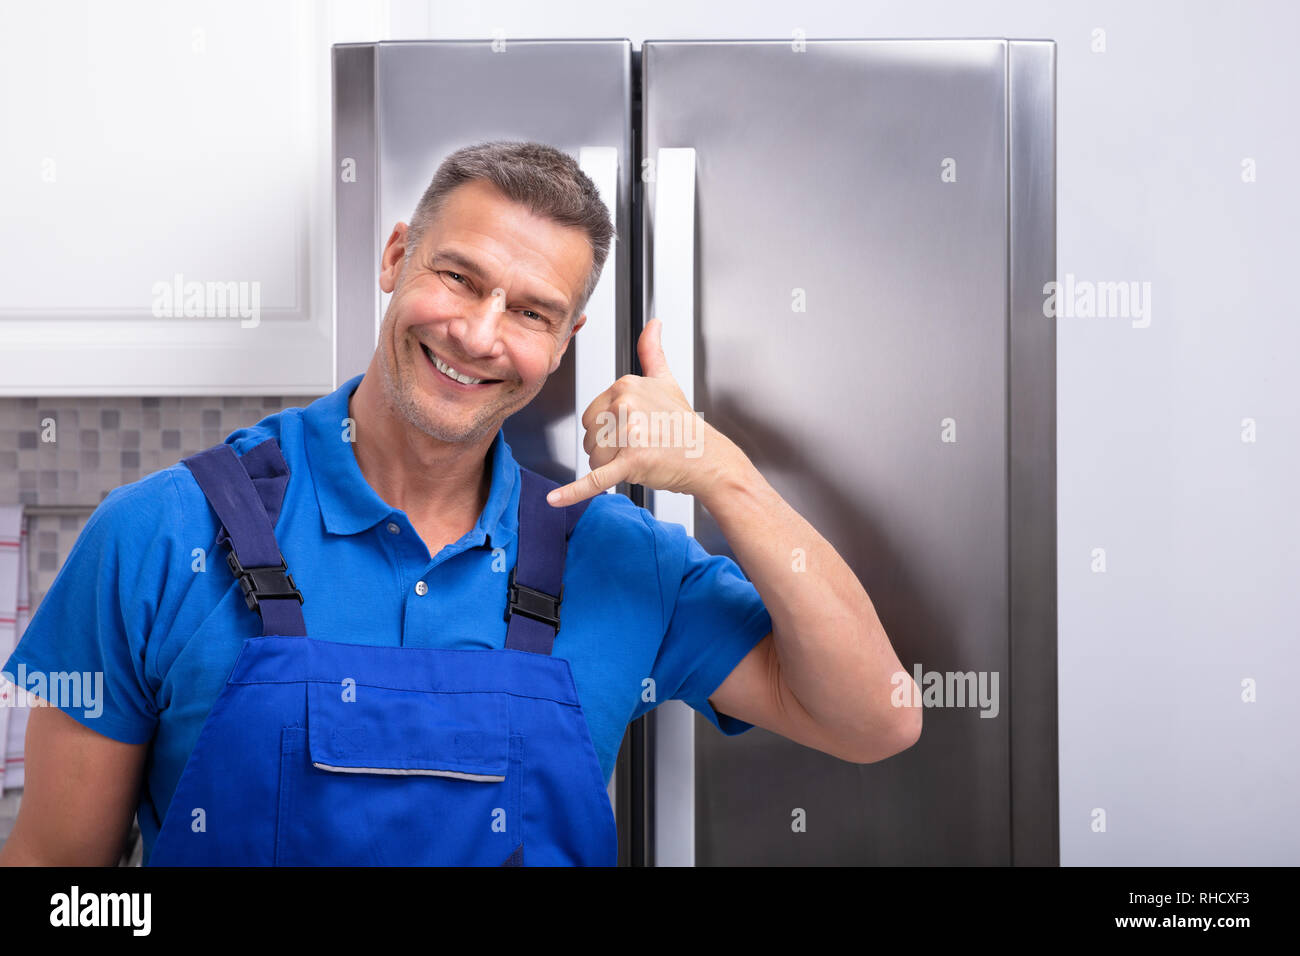 Happy Mature Male Technician Gesturing Call Sign Stock Photo